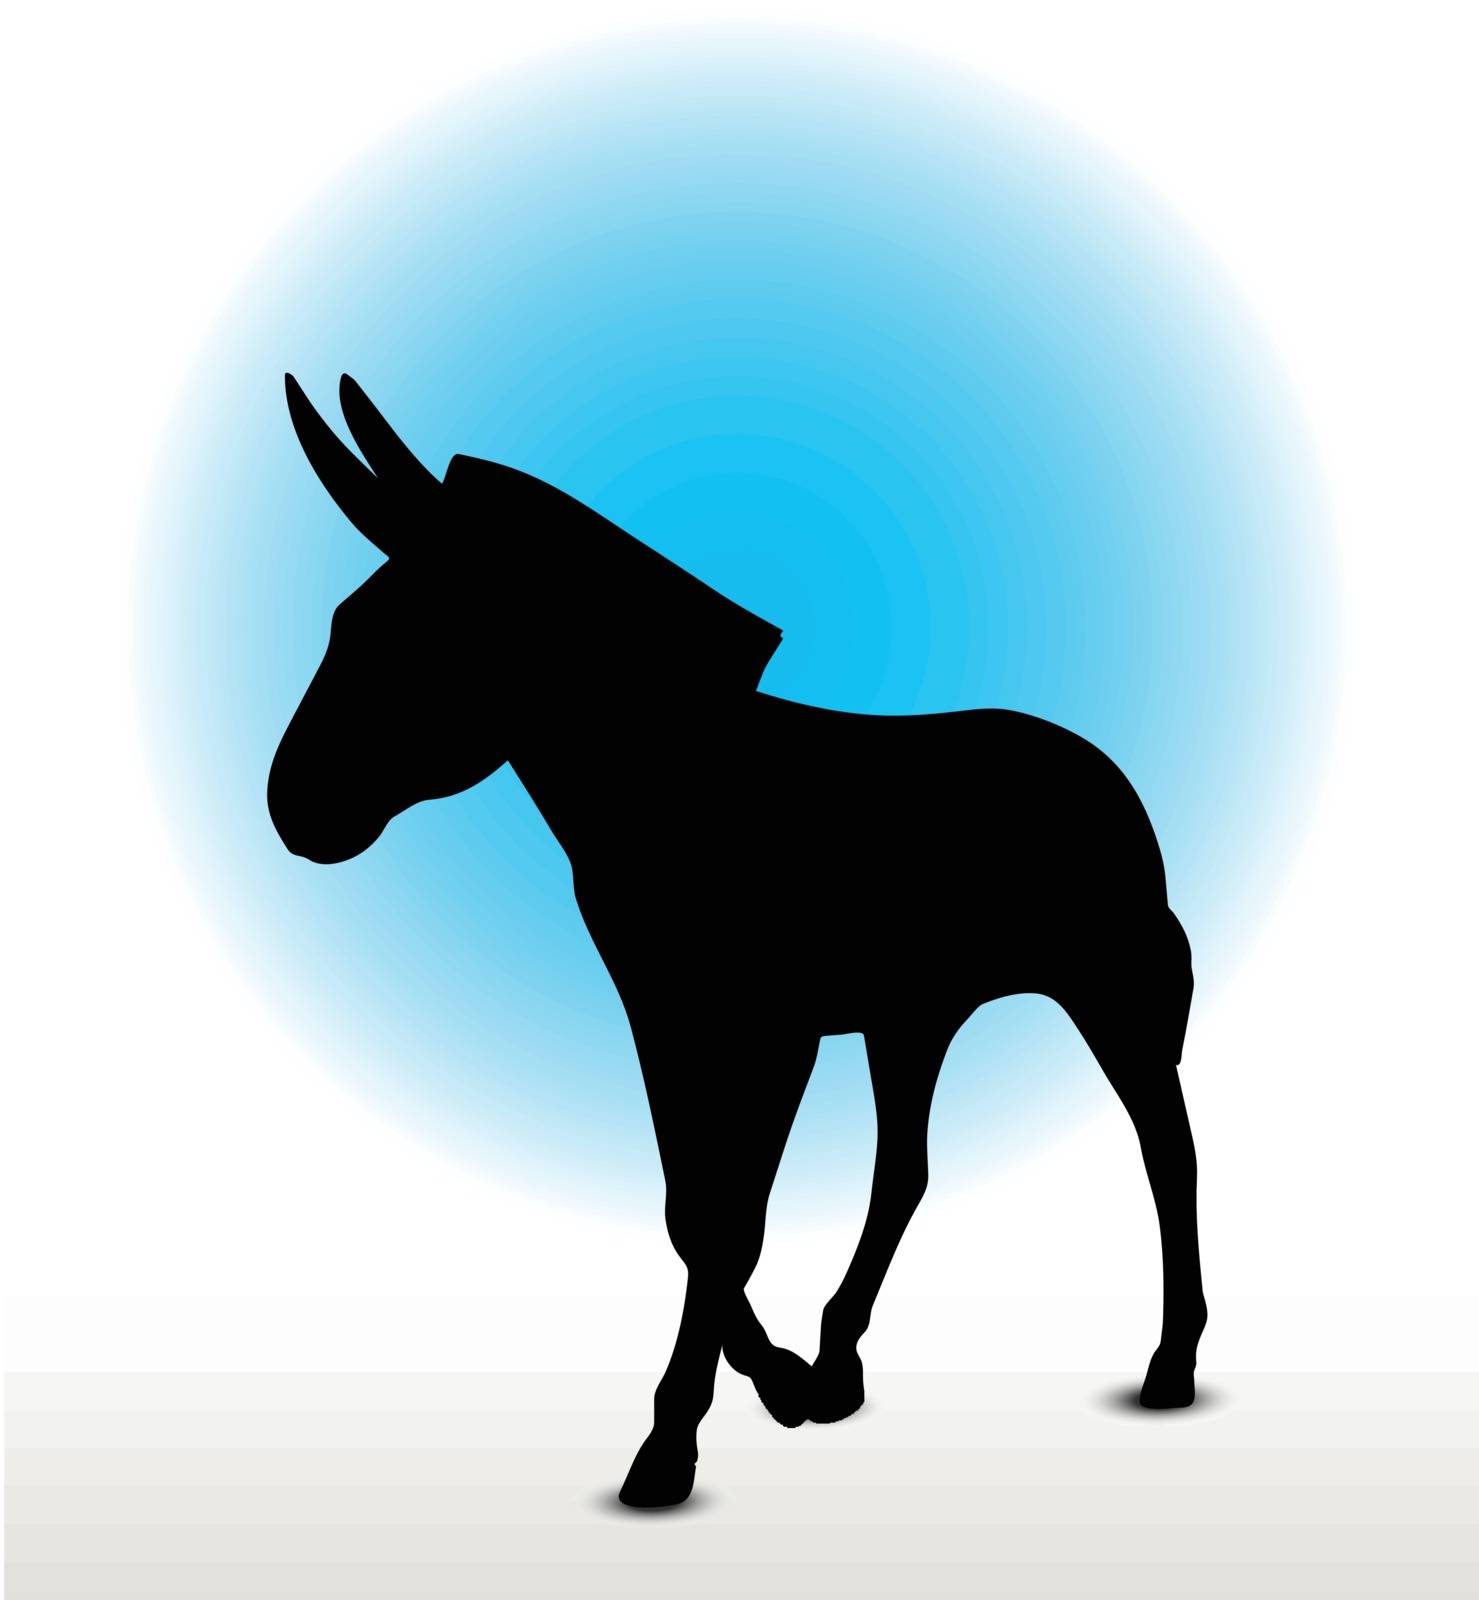 donkey silhouette by Istanbul2009